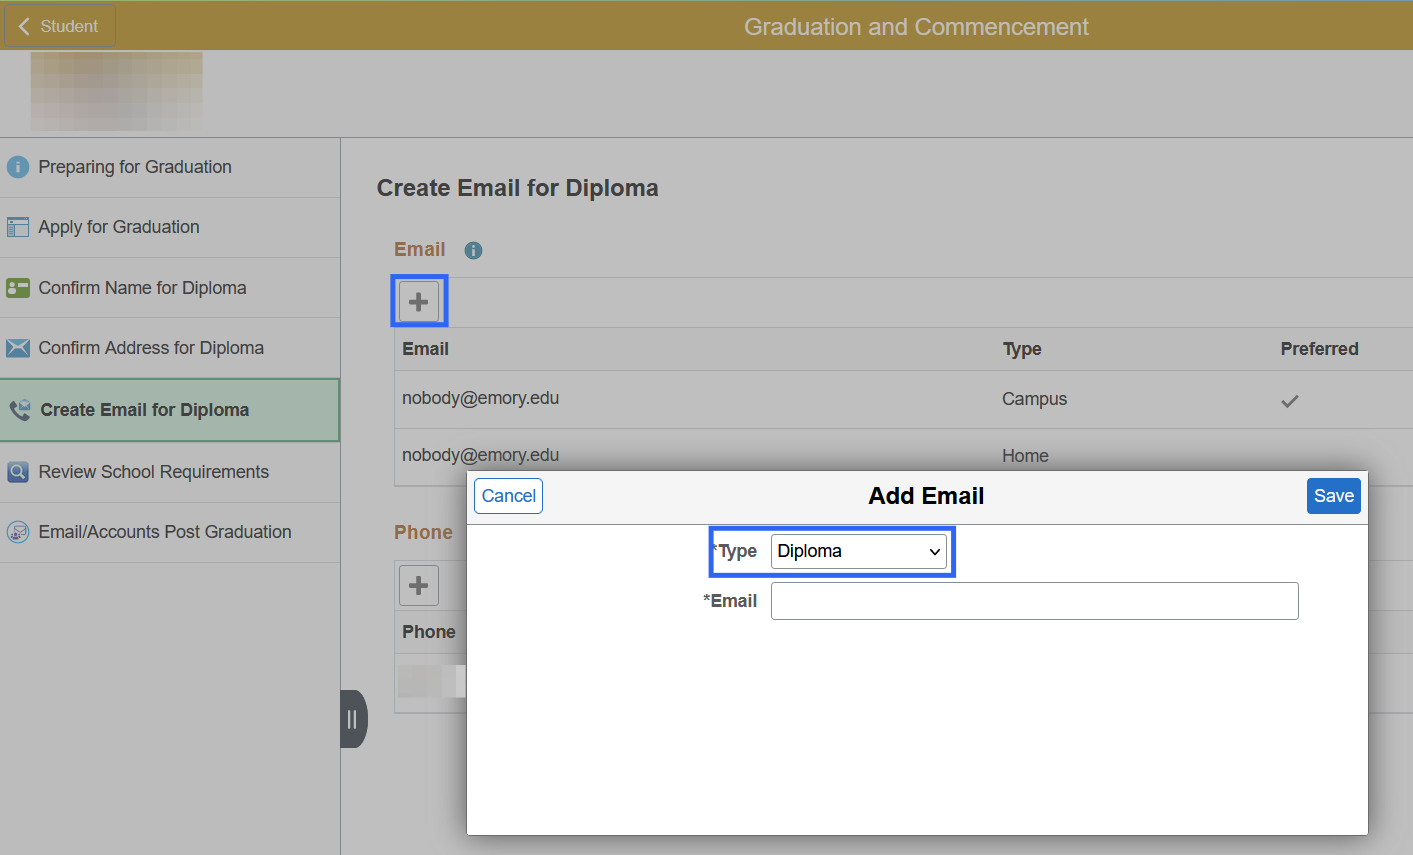 Create Email for Diploma